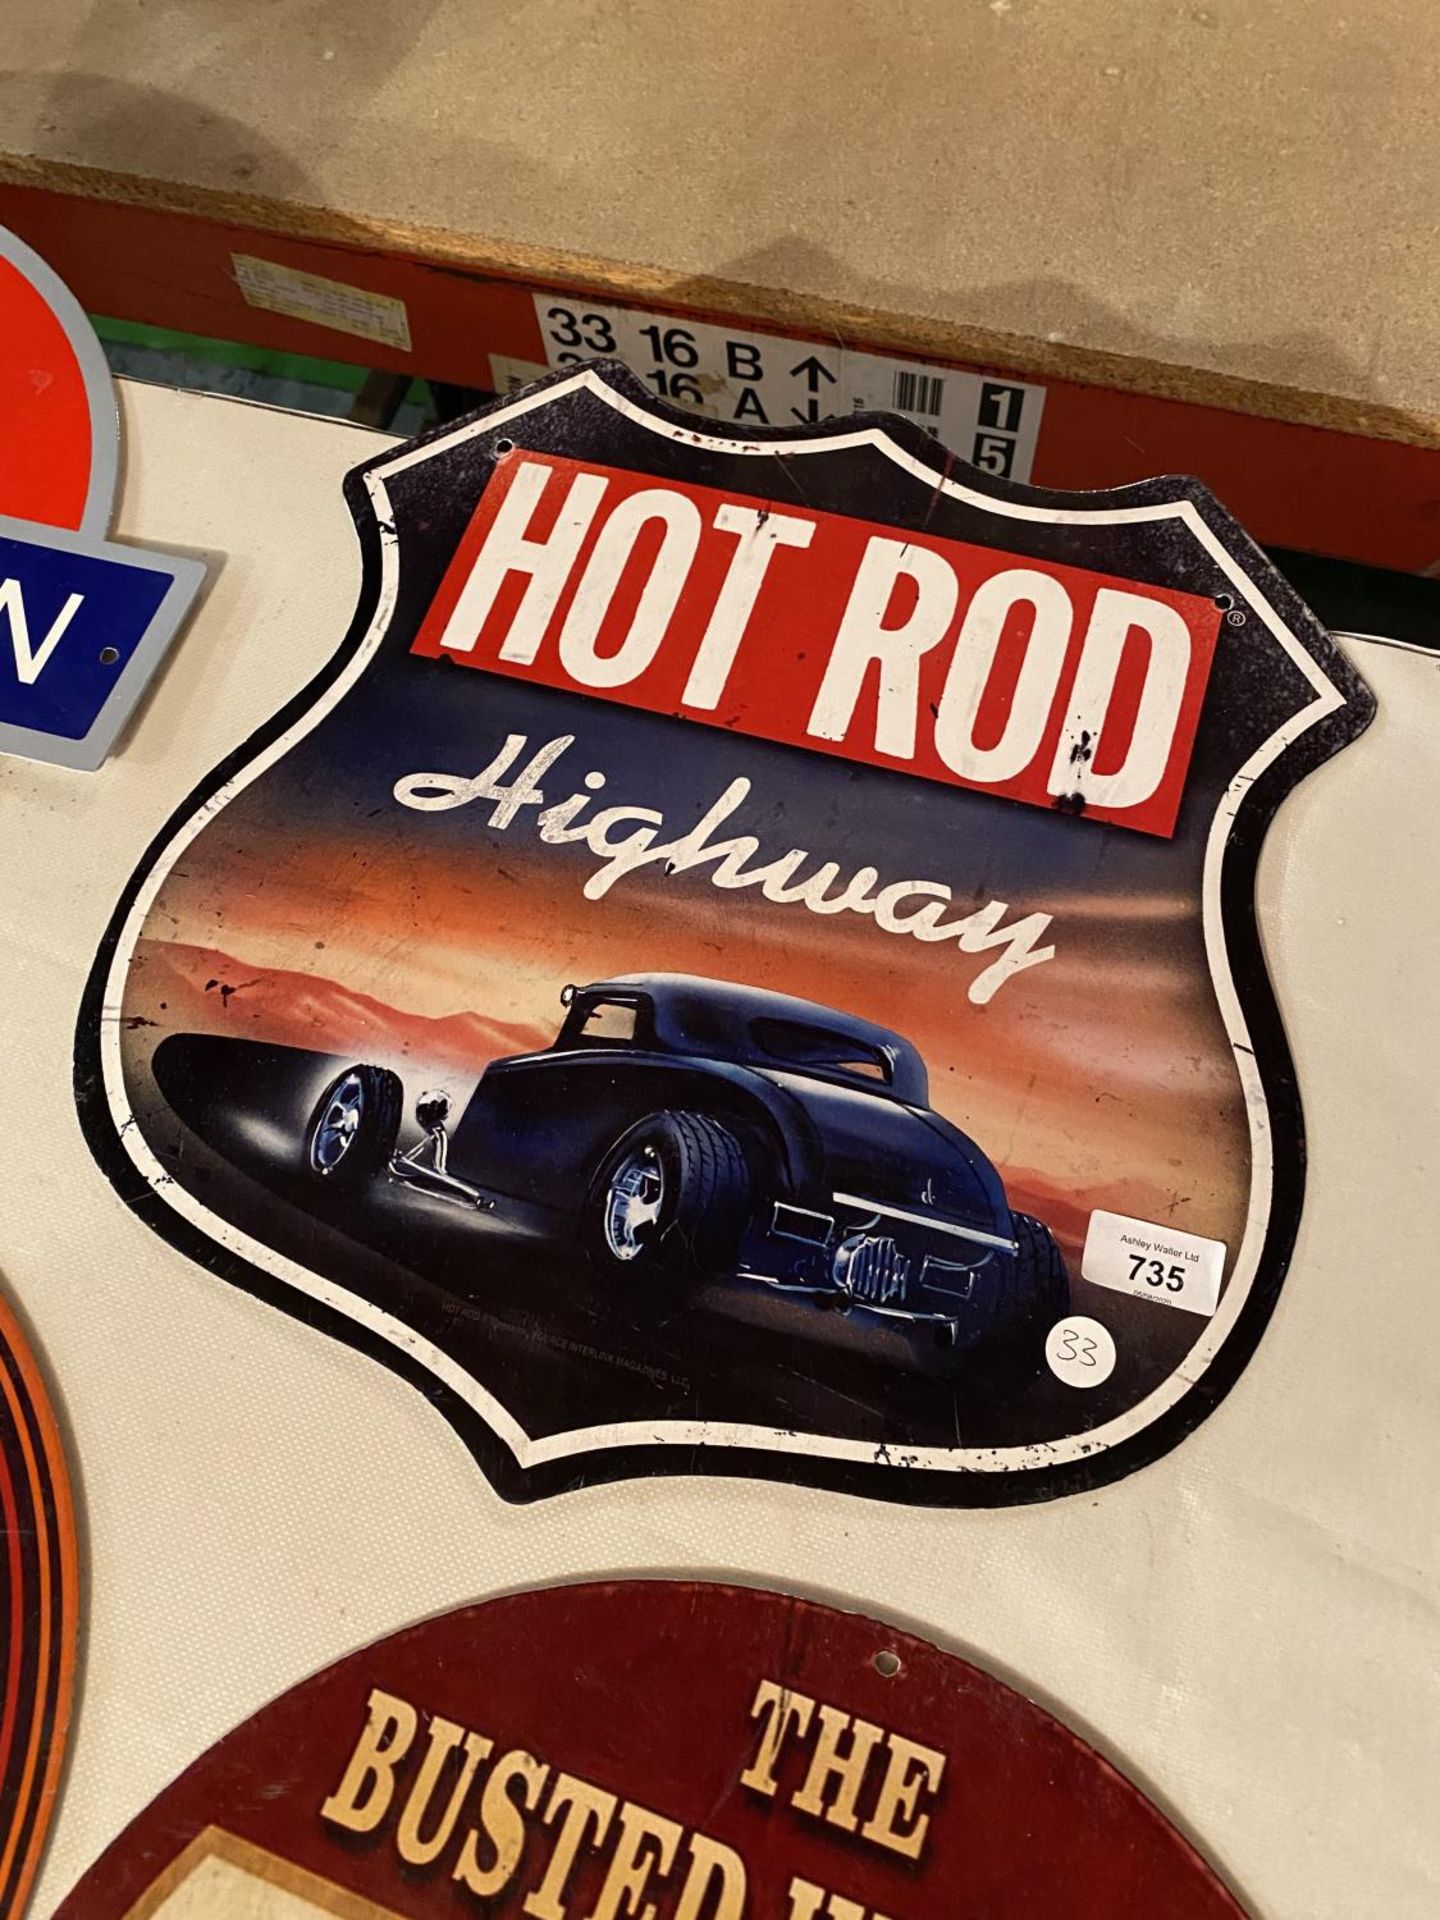 A HOT ROD HIGHWAY METAL ADVERTSING SIGN